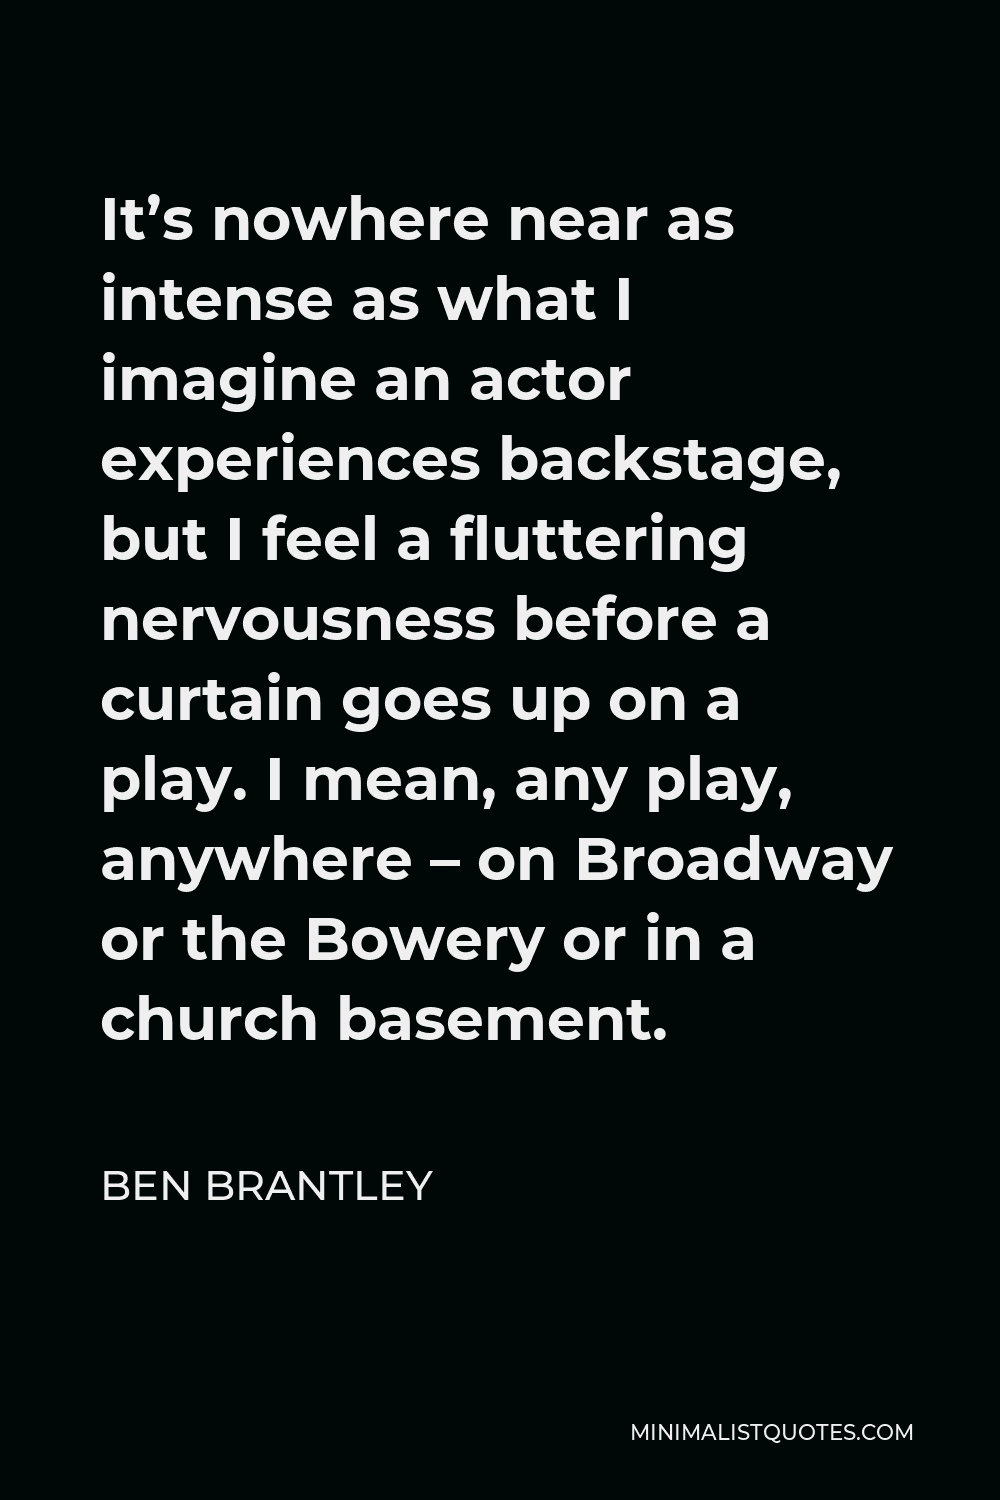 Ben Brantley Quote - It’s nowhere near as intense as what I imagine an actor experiences backstage, but I feel a fluttering nervousness before a curtain goes up on a play. I mean, any play, anywhere – on Broadway or the Bowery or in a church basement.